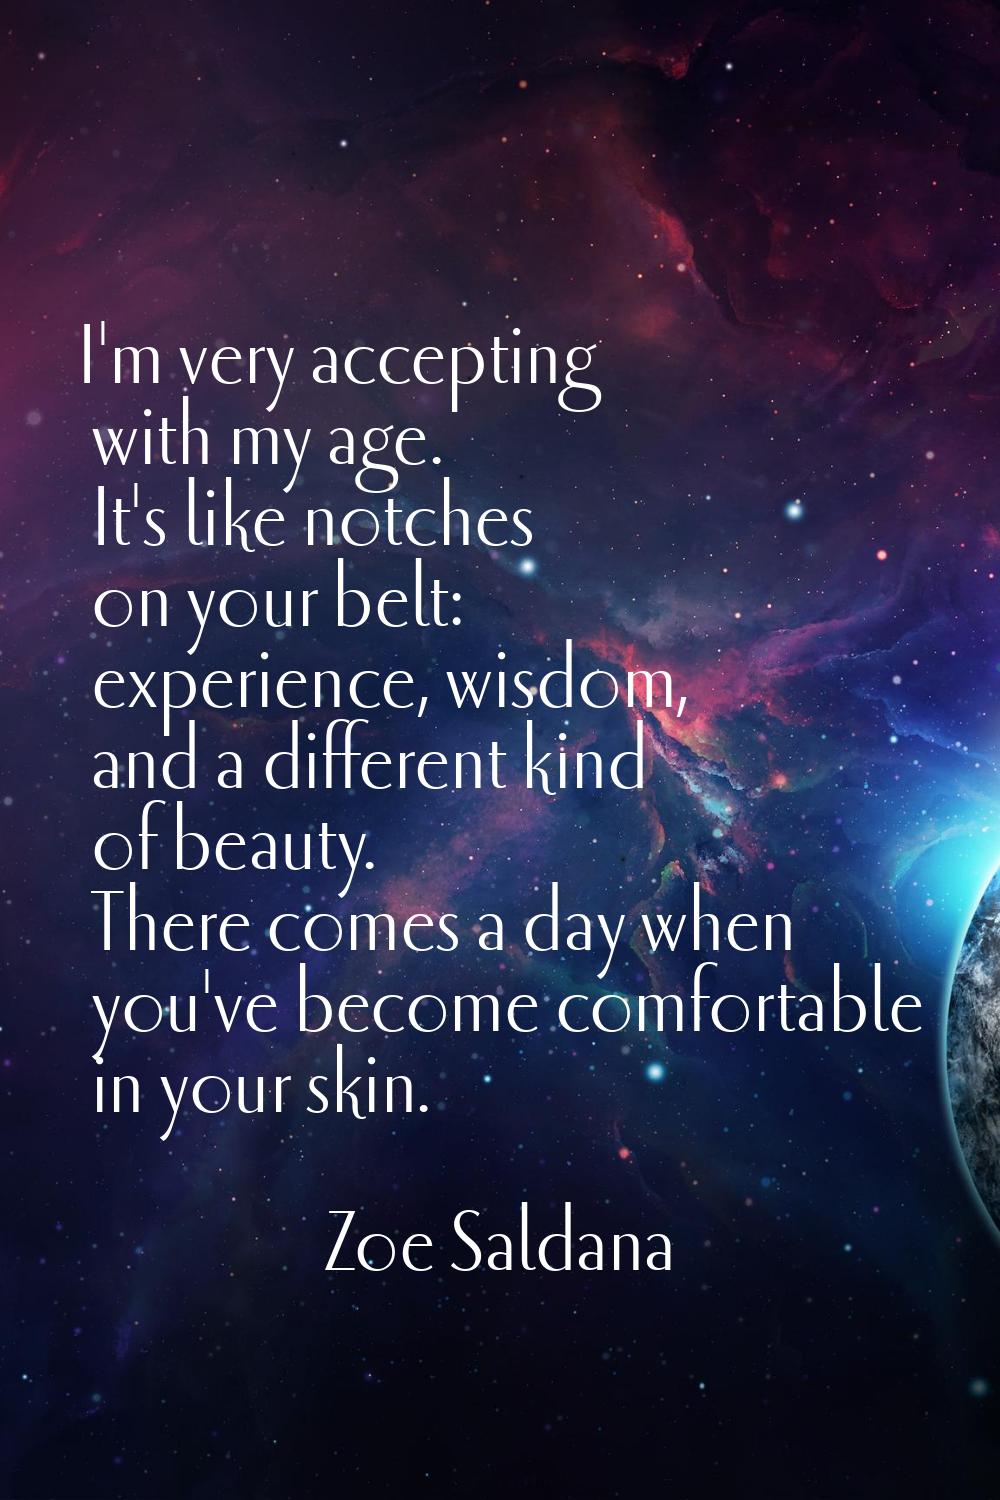 I'm very accepting with my age. It's like notches on your belt: experience, wisdom, and a different